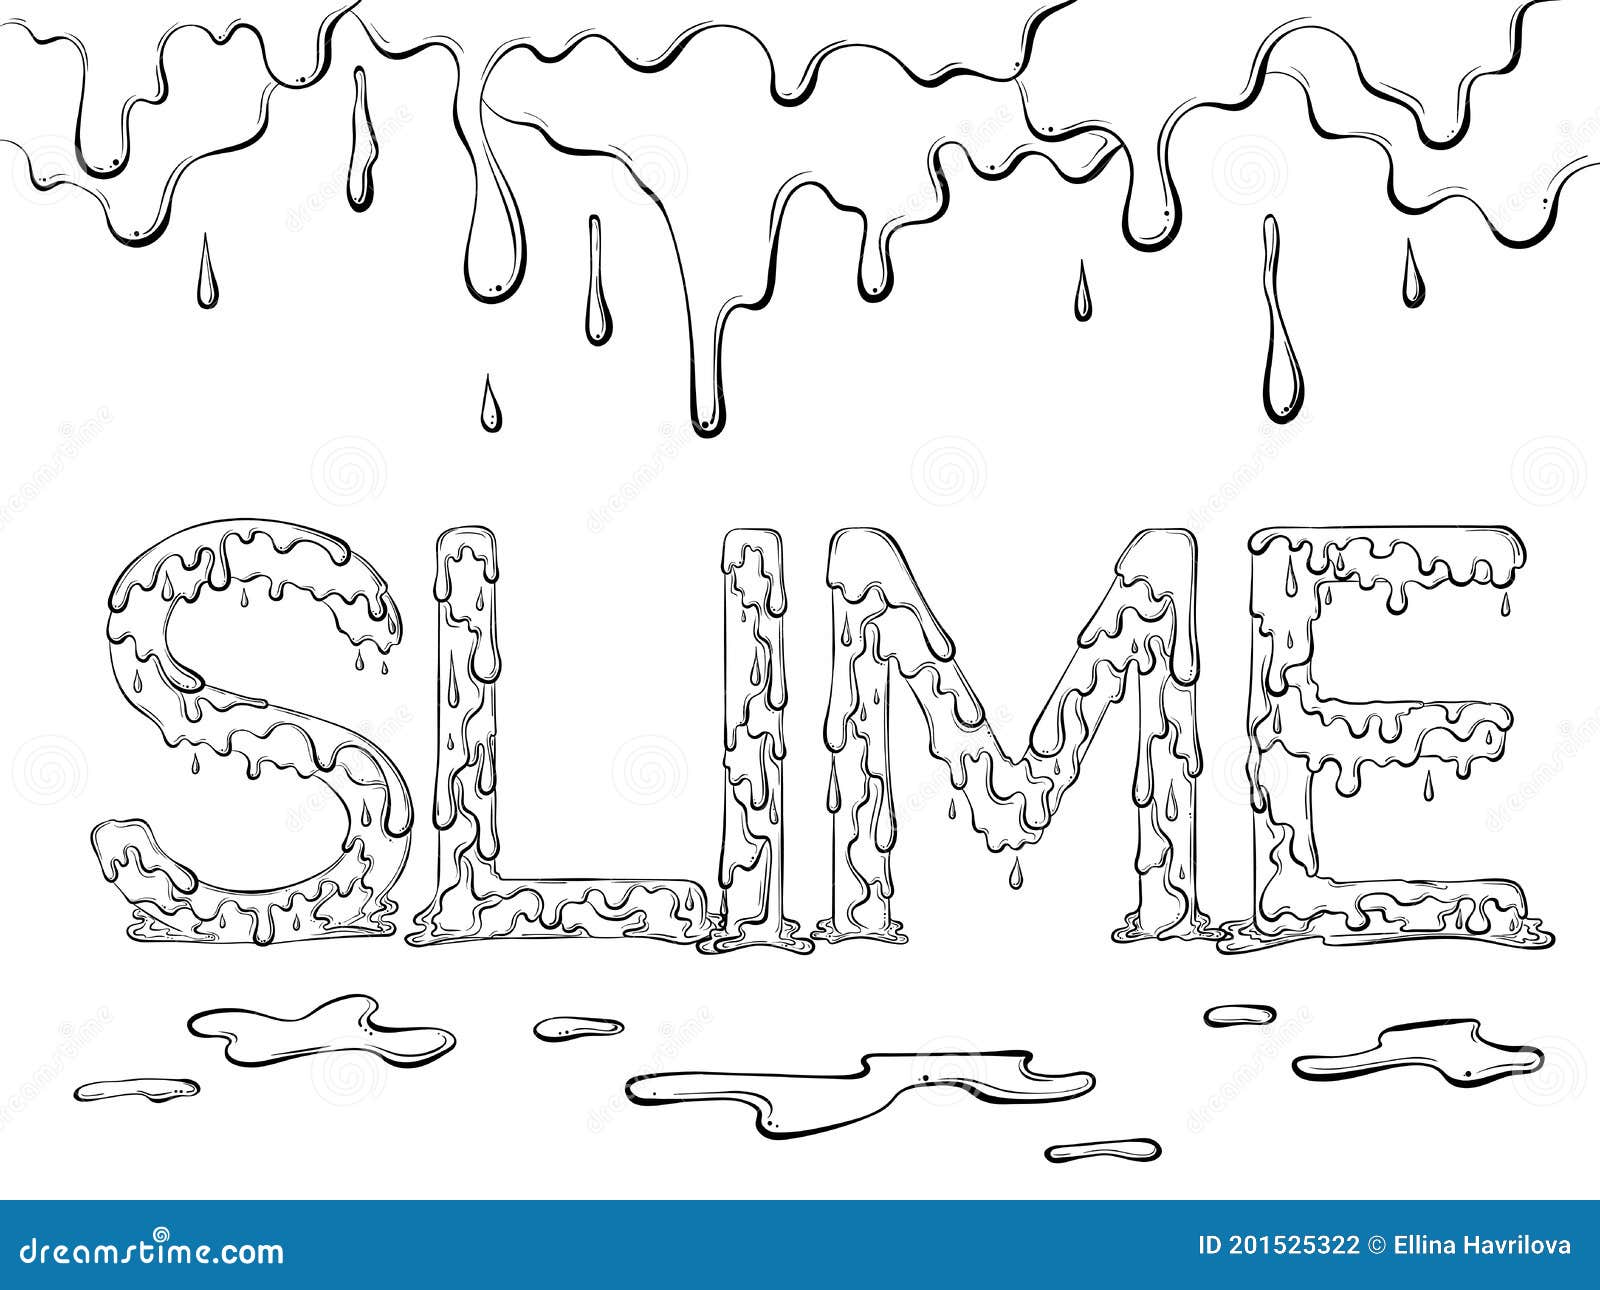 Lettering dripping word Slime. Vector illustration isolated on white  background. Design for coloring book page in hand drawn style. Words for  print, banners, posters, books. Stock Vector